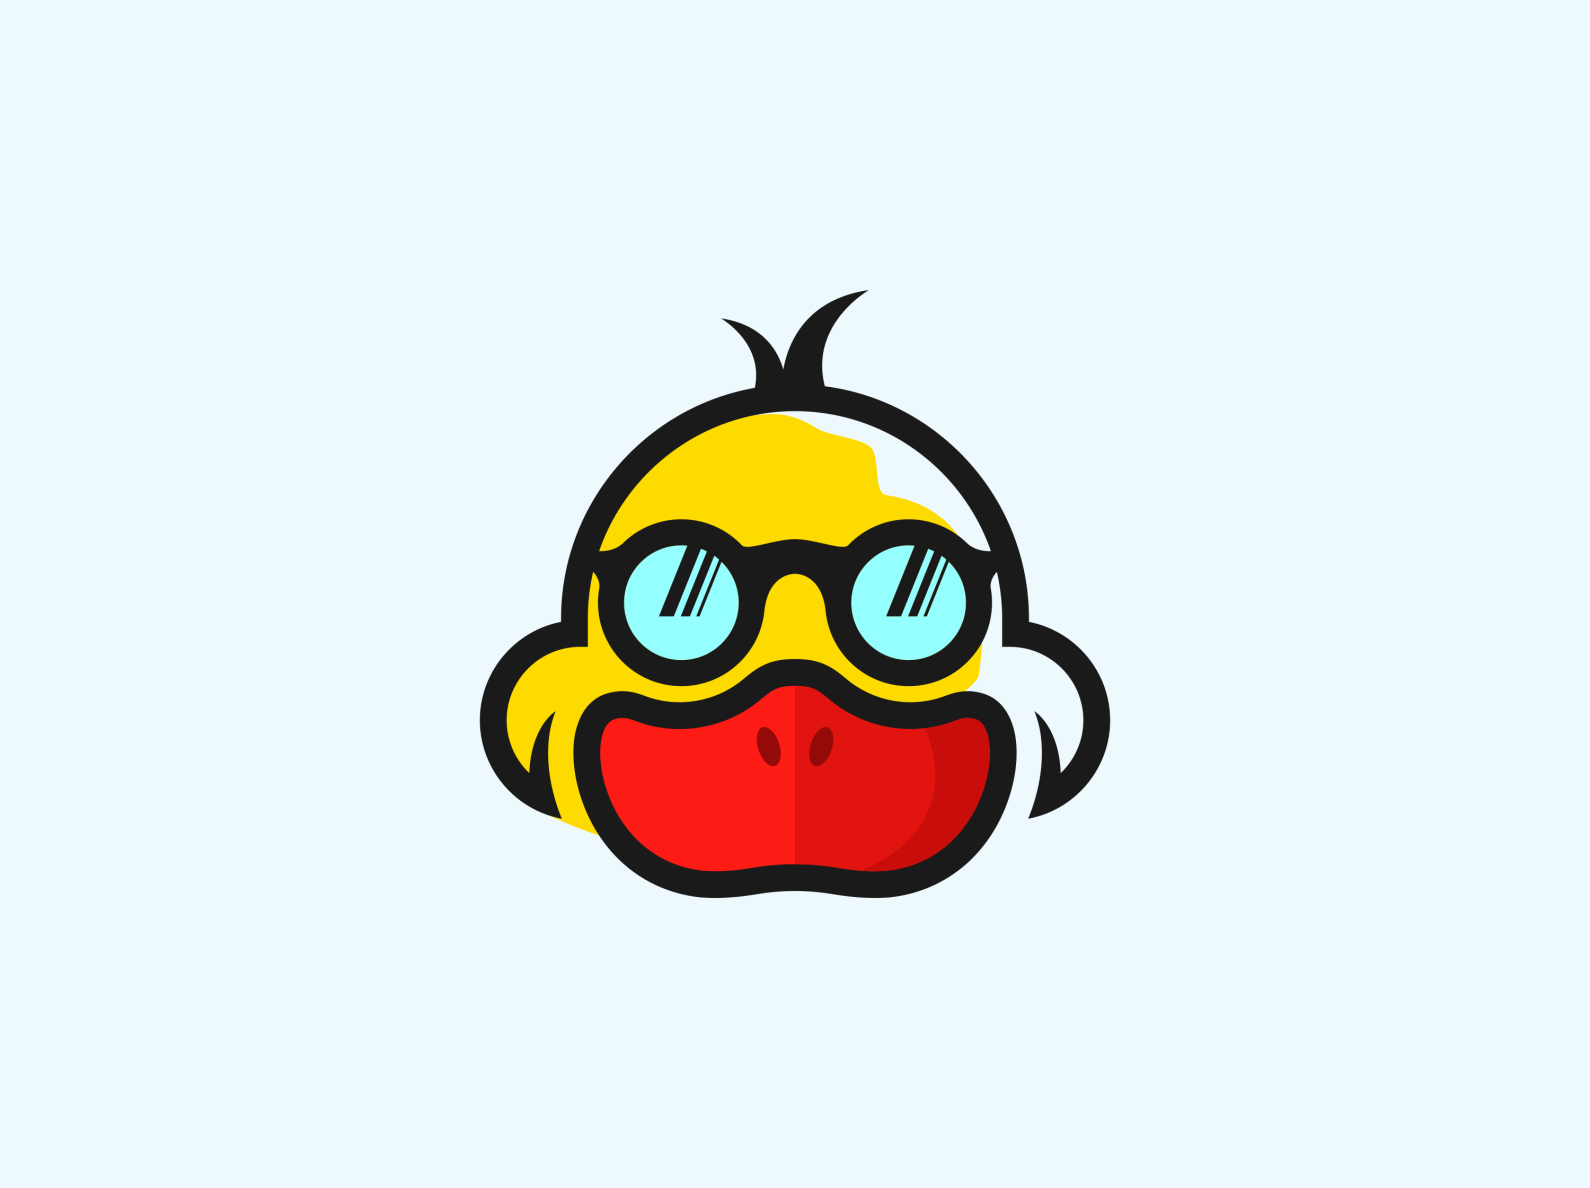 Duck with sunglasses 1 by Jennaira Designs on Dribbble